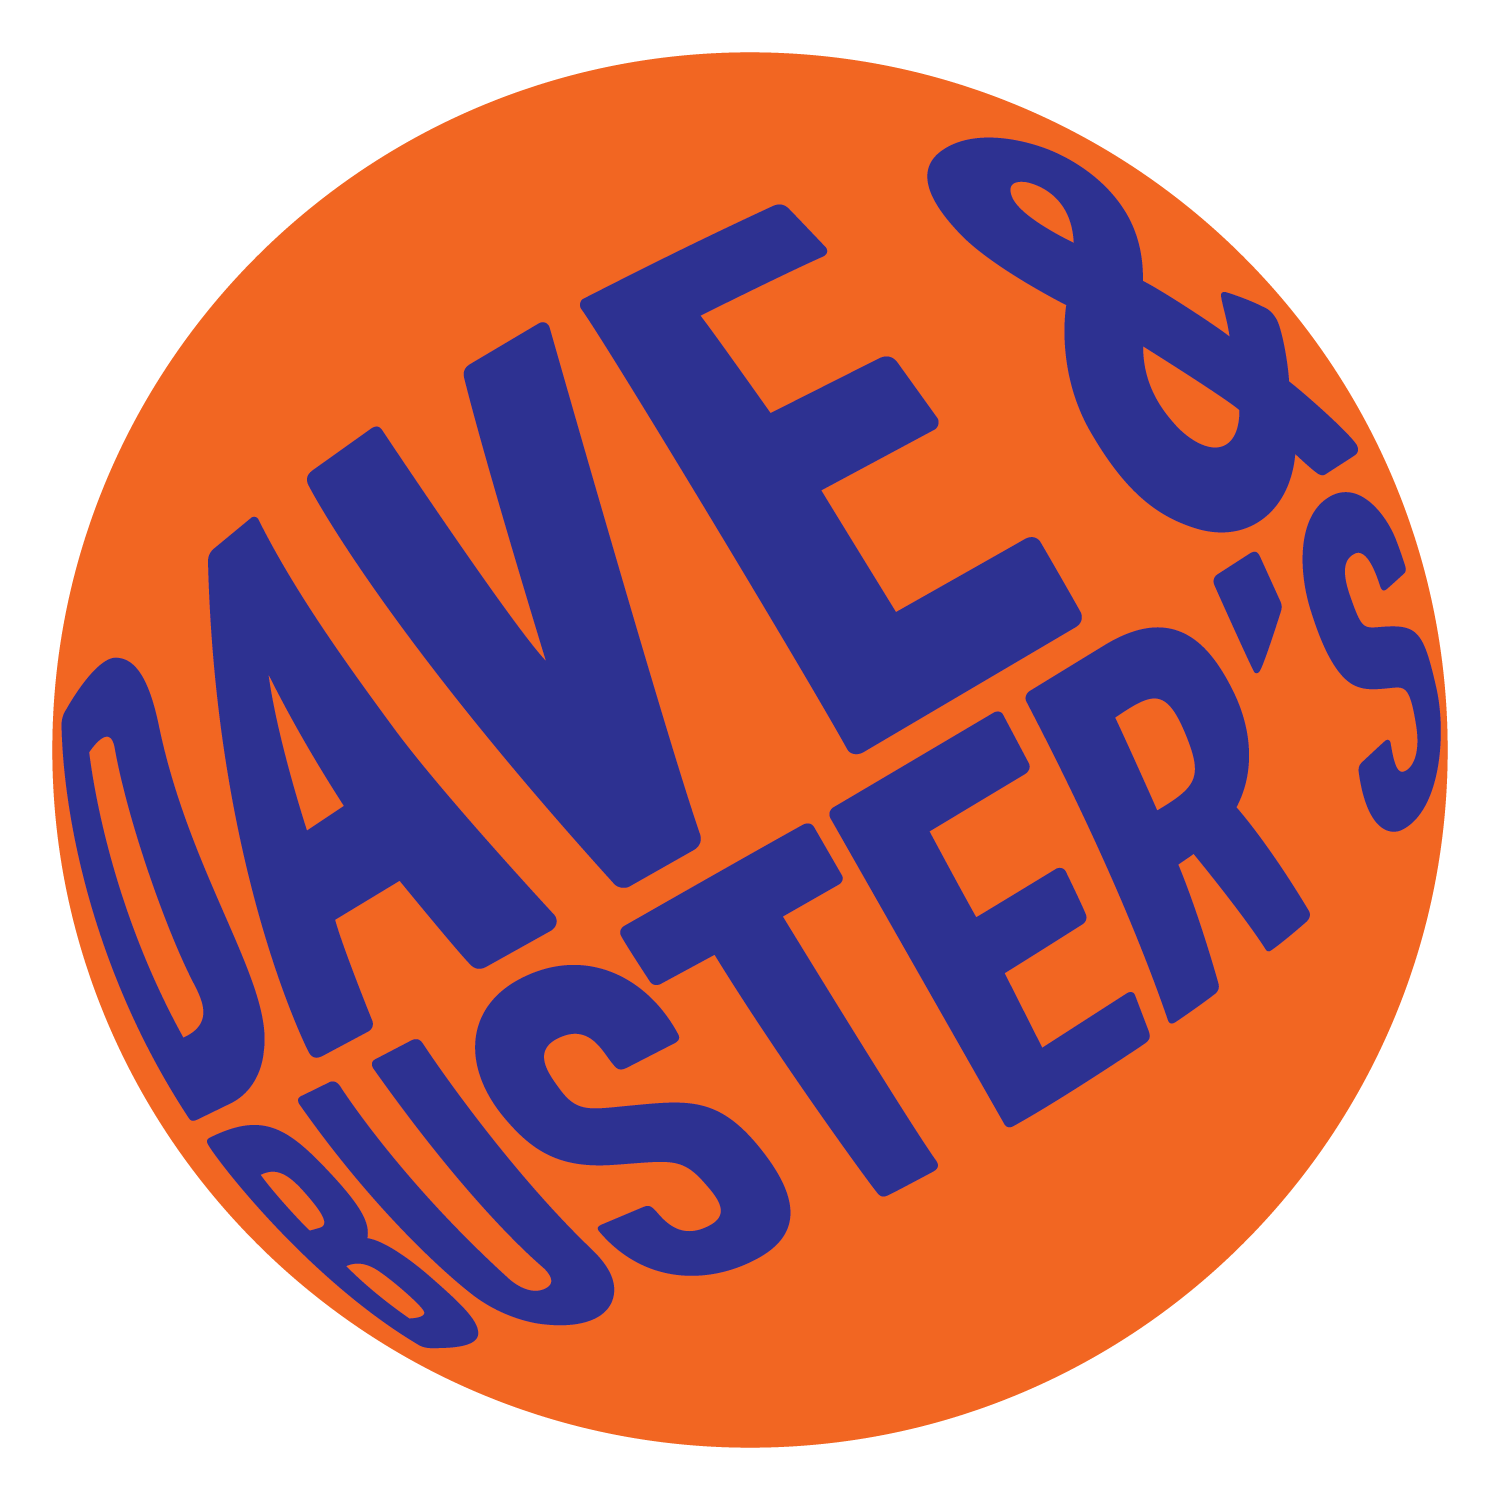 Dave & Buster's Long Beach